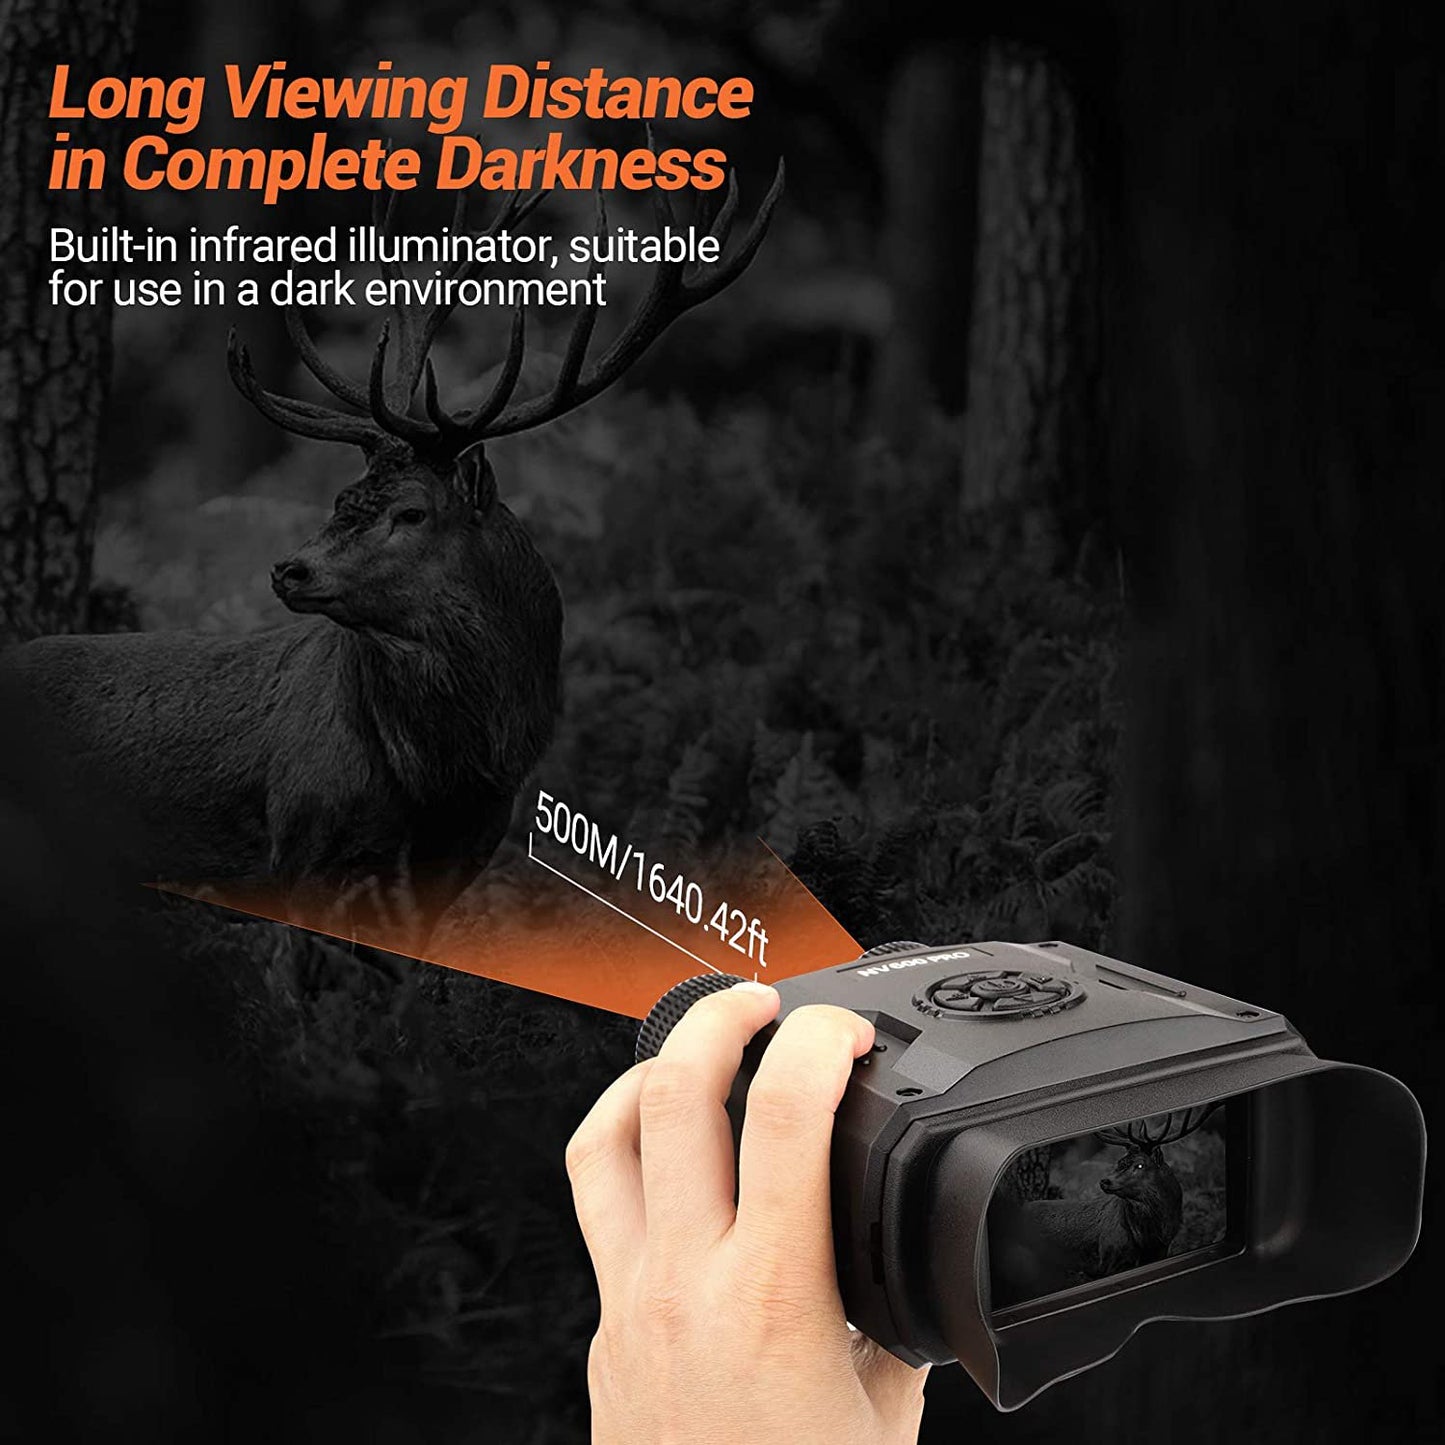 Night Vision Goggles -5X Night Vision Binoculars for Adults，3,5'' Large Screen Infrared Binocular Can Save Photo and Video with 32GB Memory Card